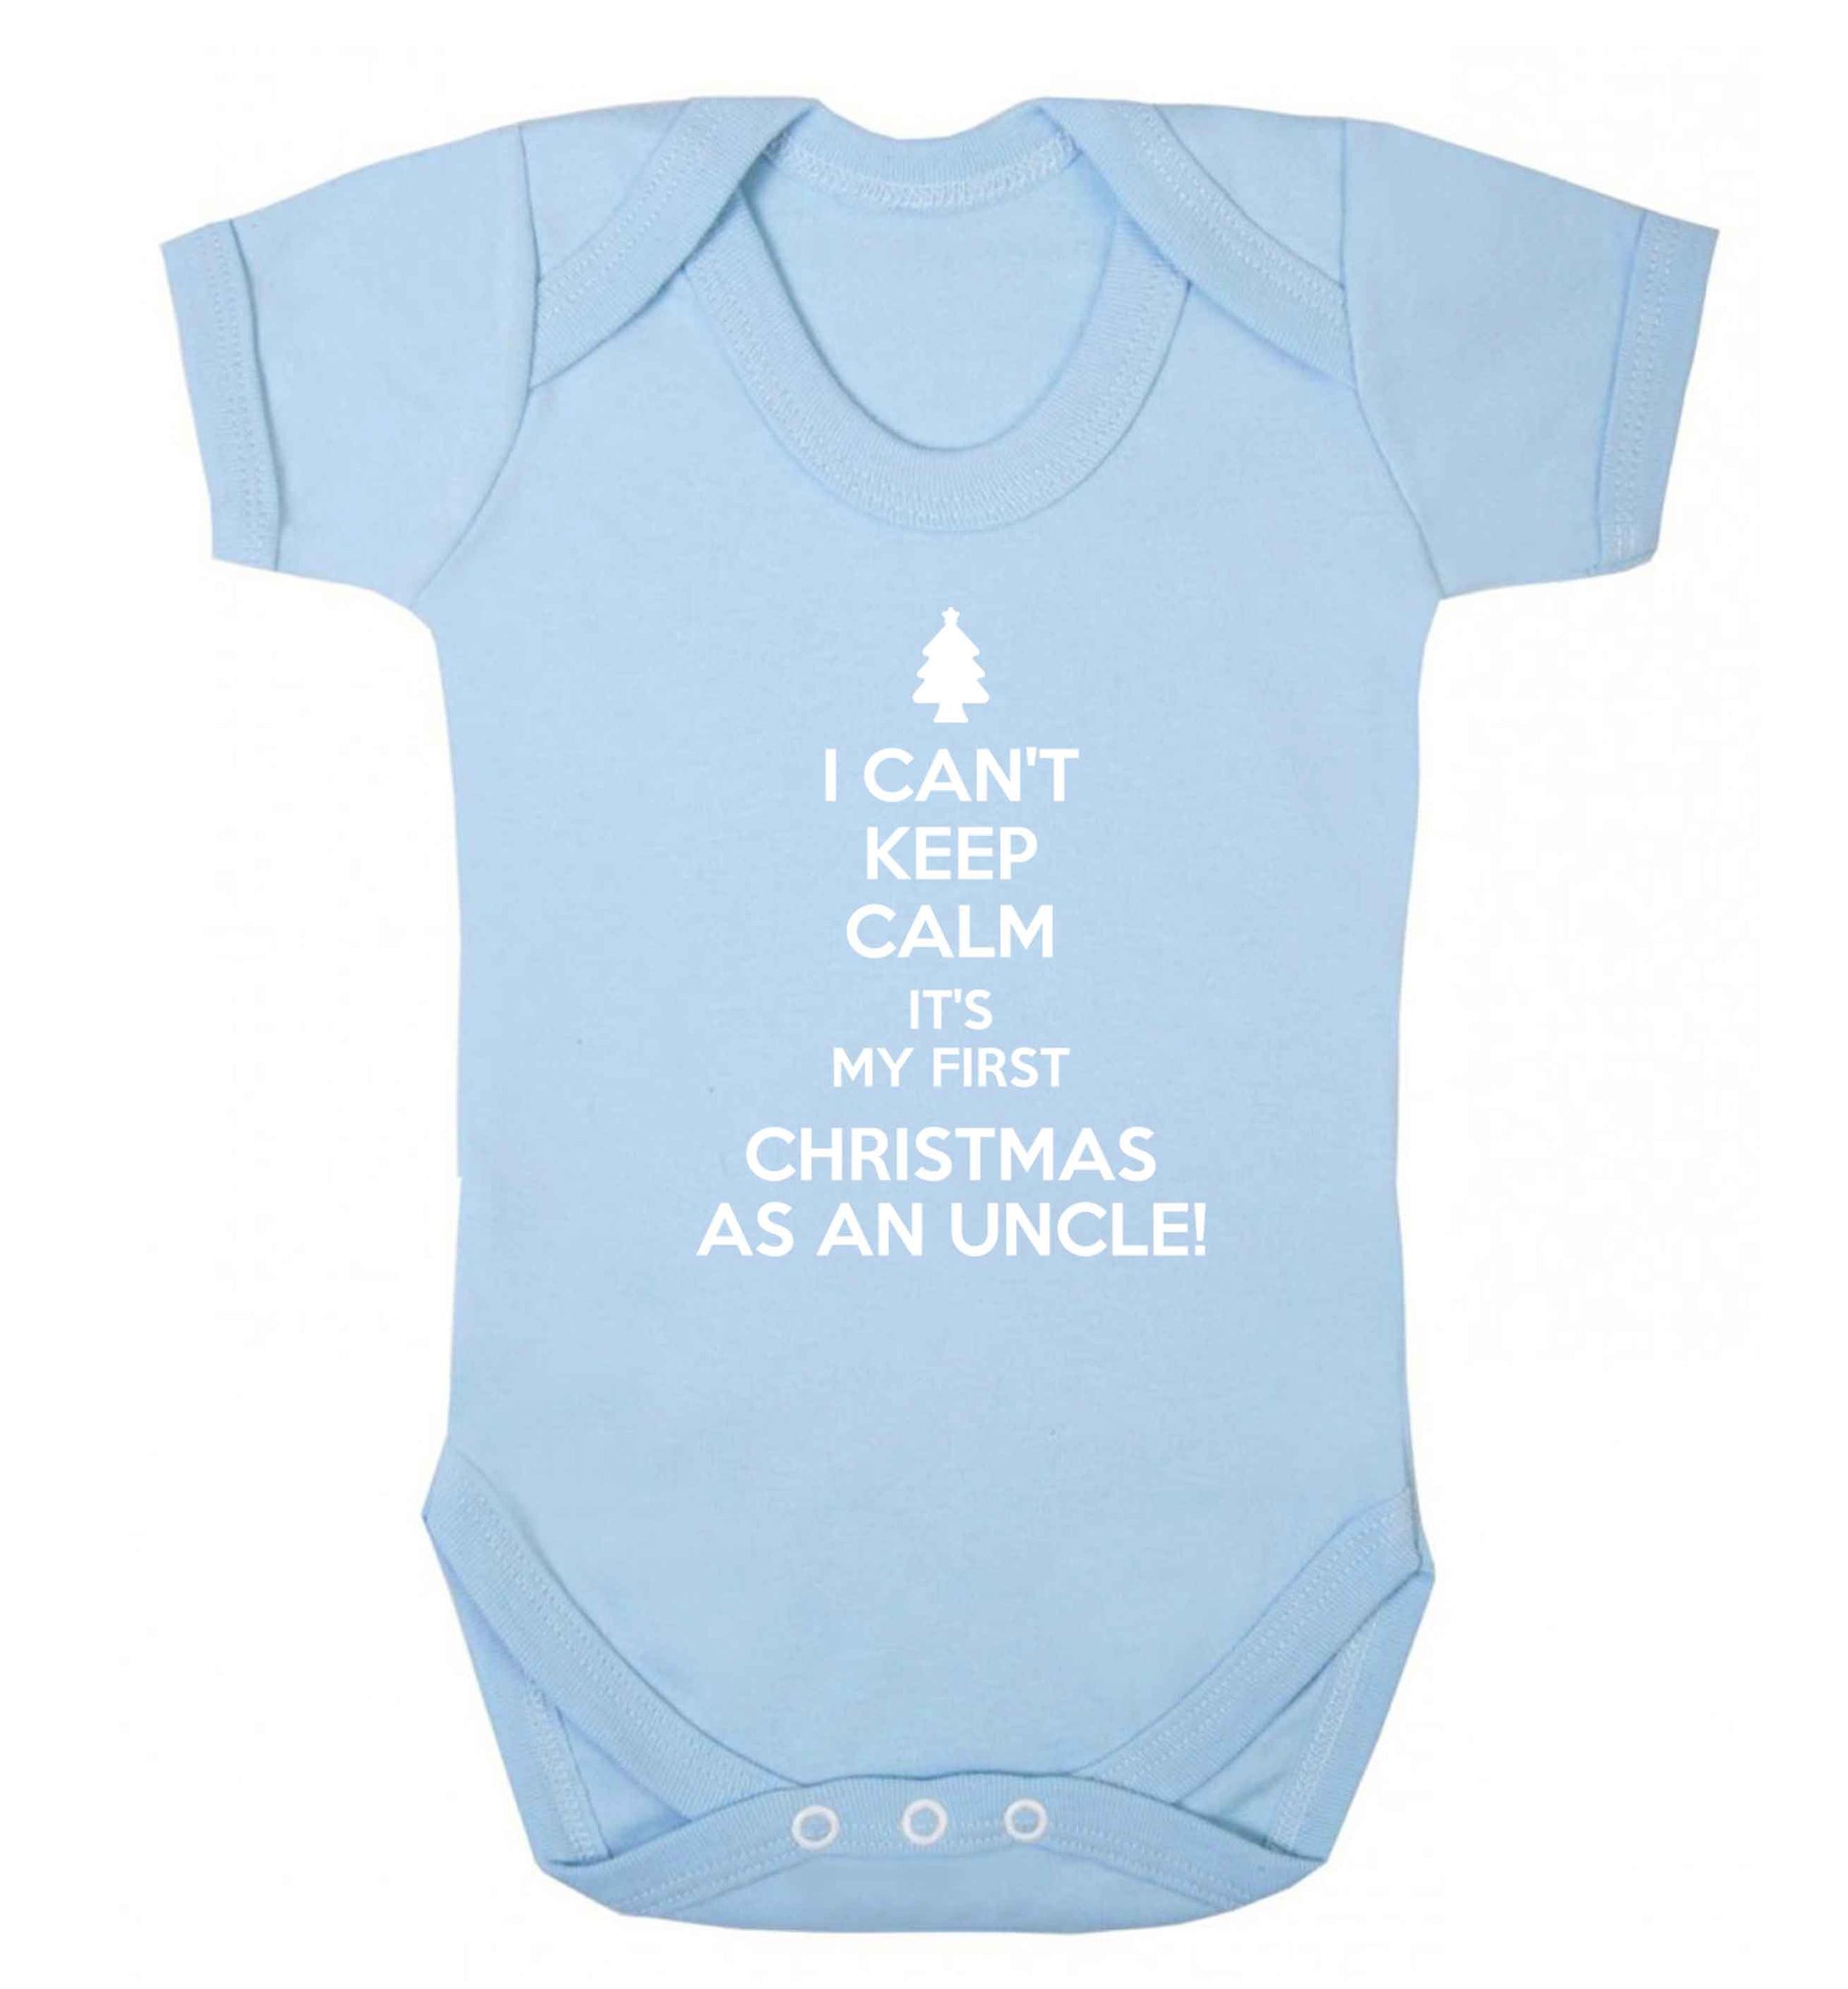 I can't keep calm it's my first Christmas as an uncle! Baby Vest pale blue 18-24 months